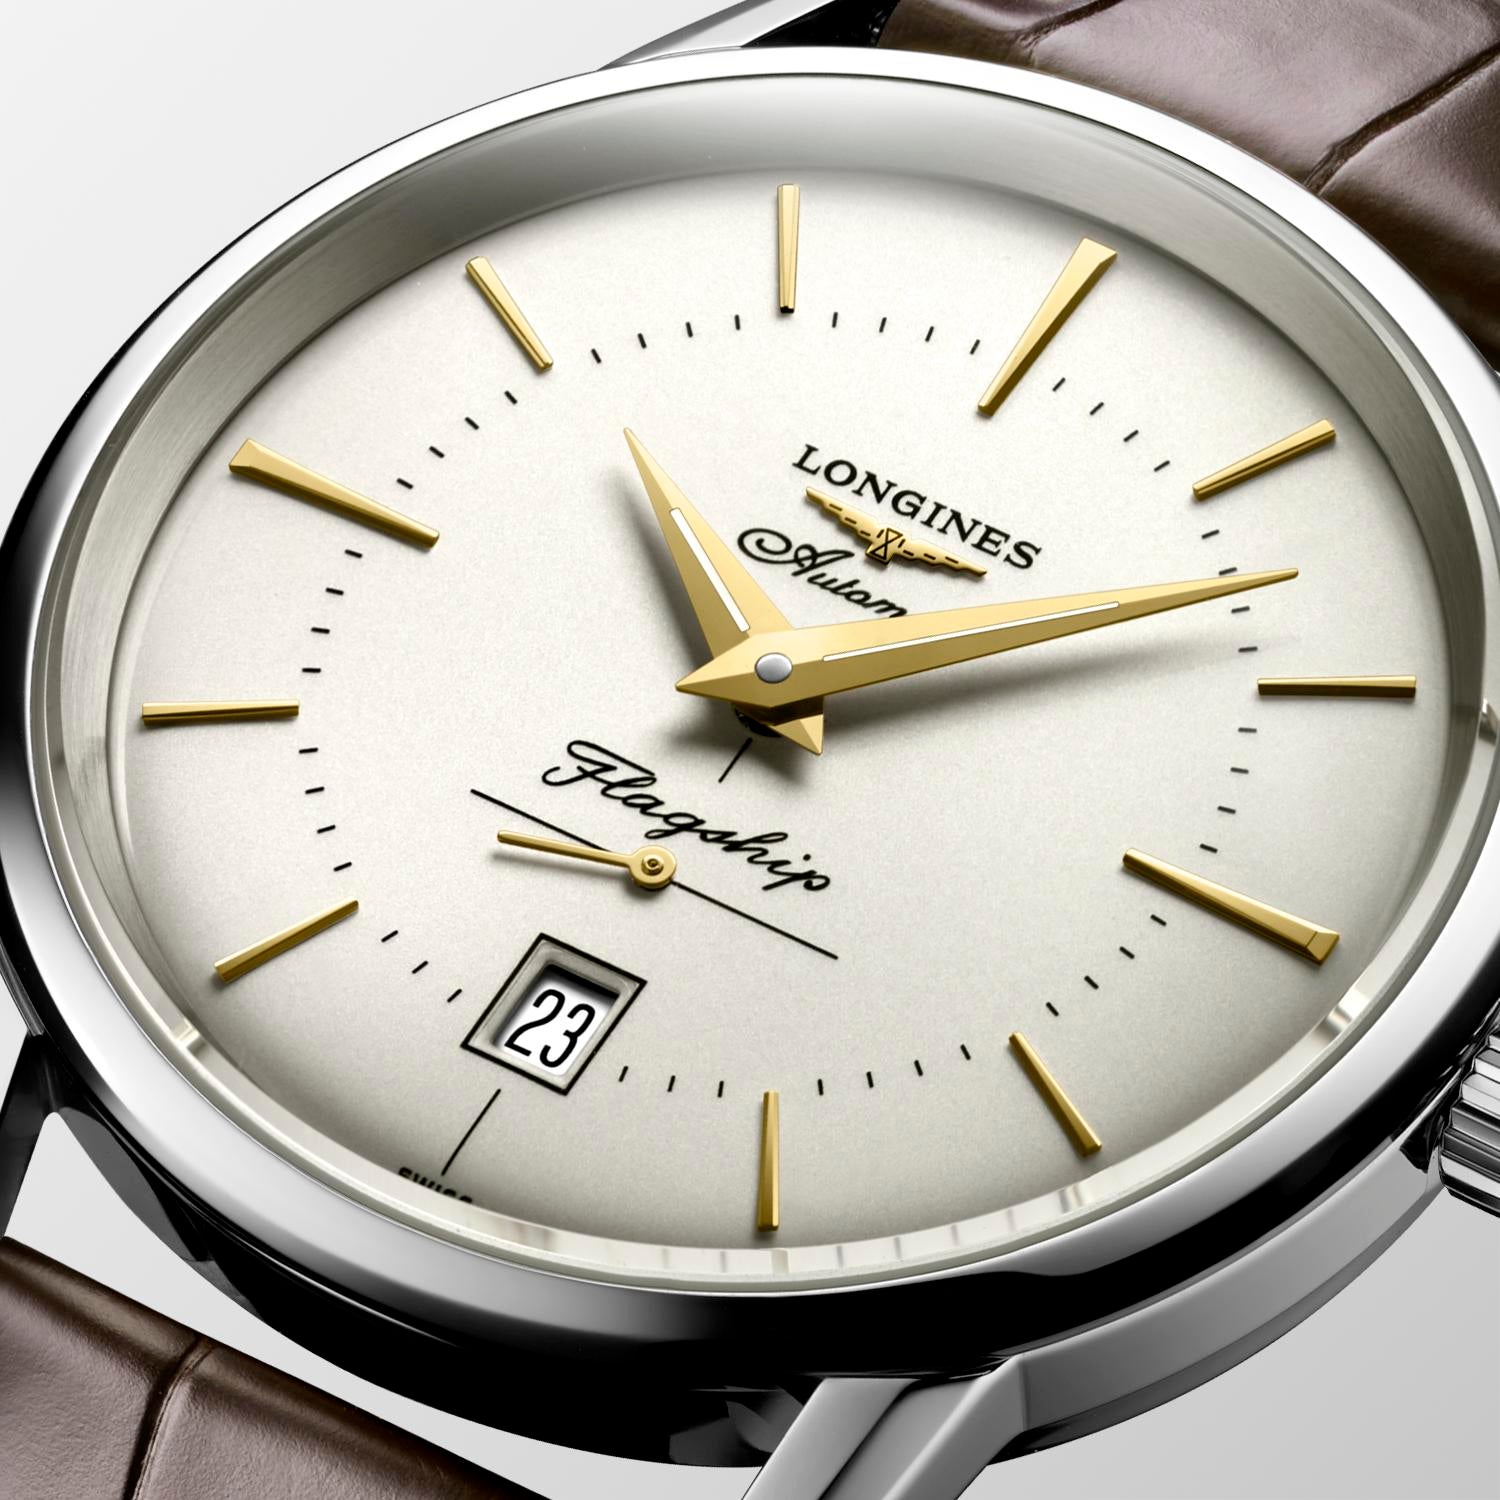 Longines Flagship Heritage Automatic (Silver Dial / 38mm)